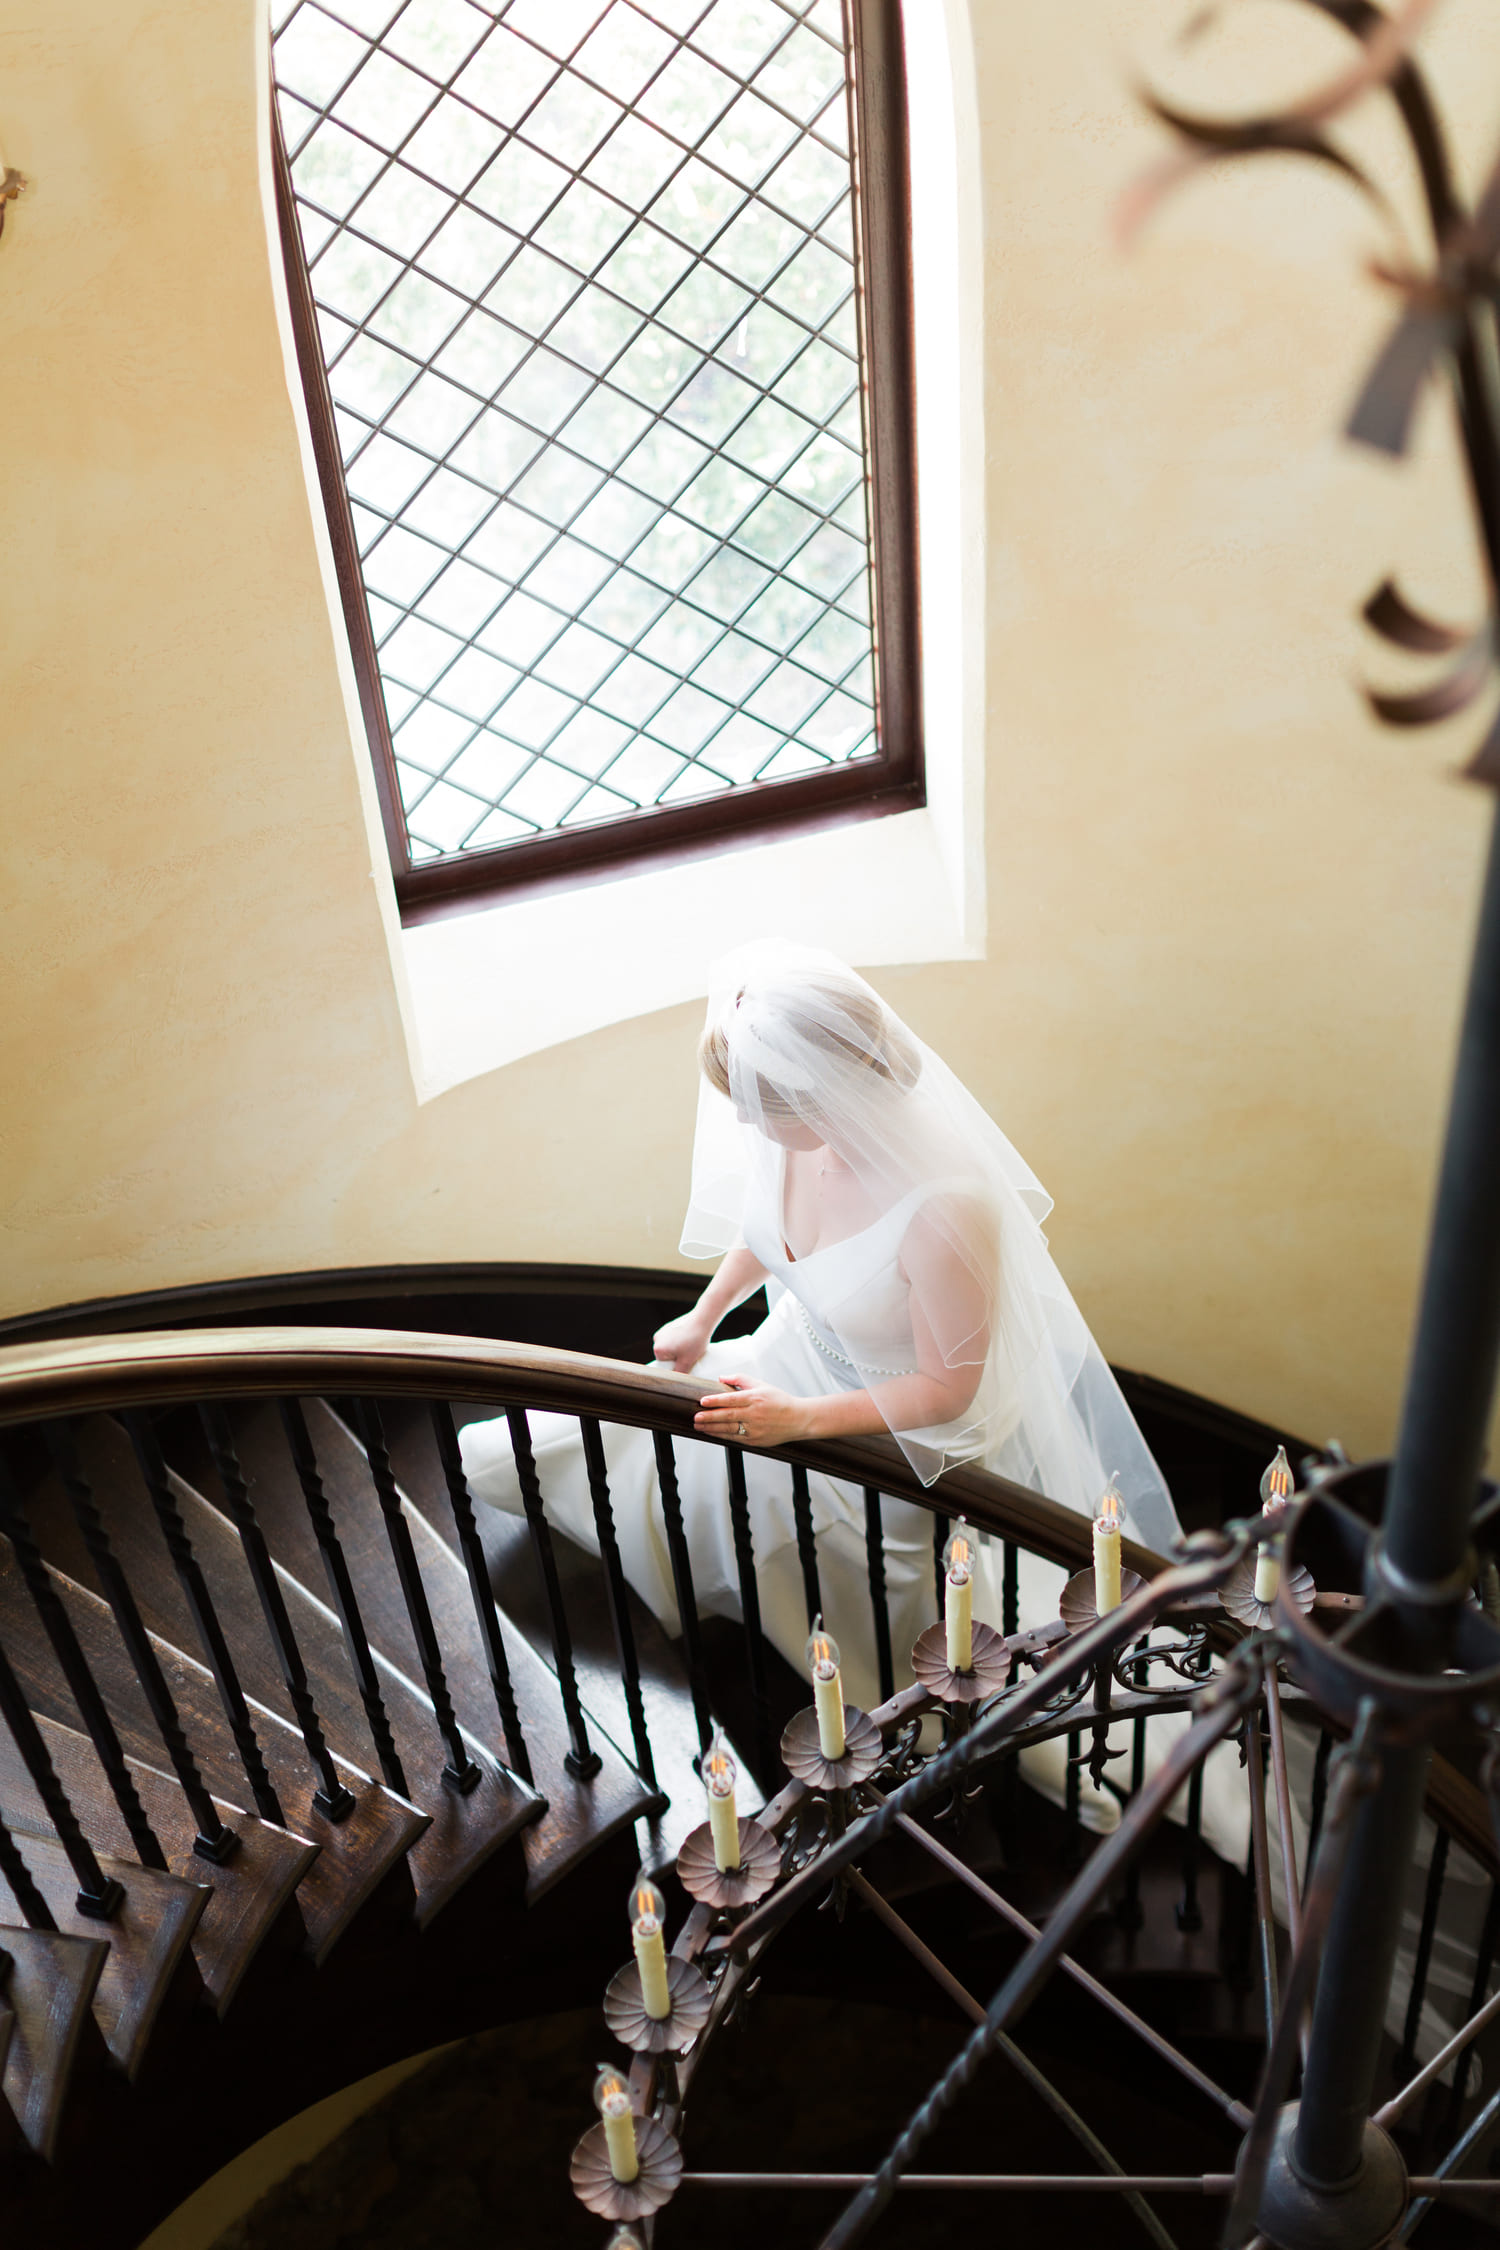 Bridal portrait session at Dover Hall